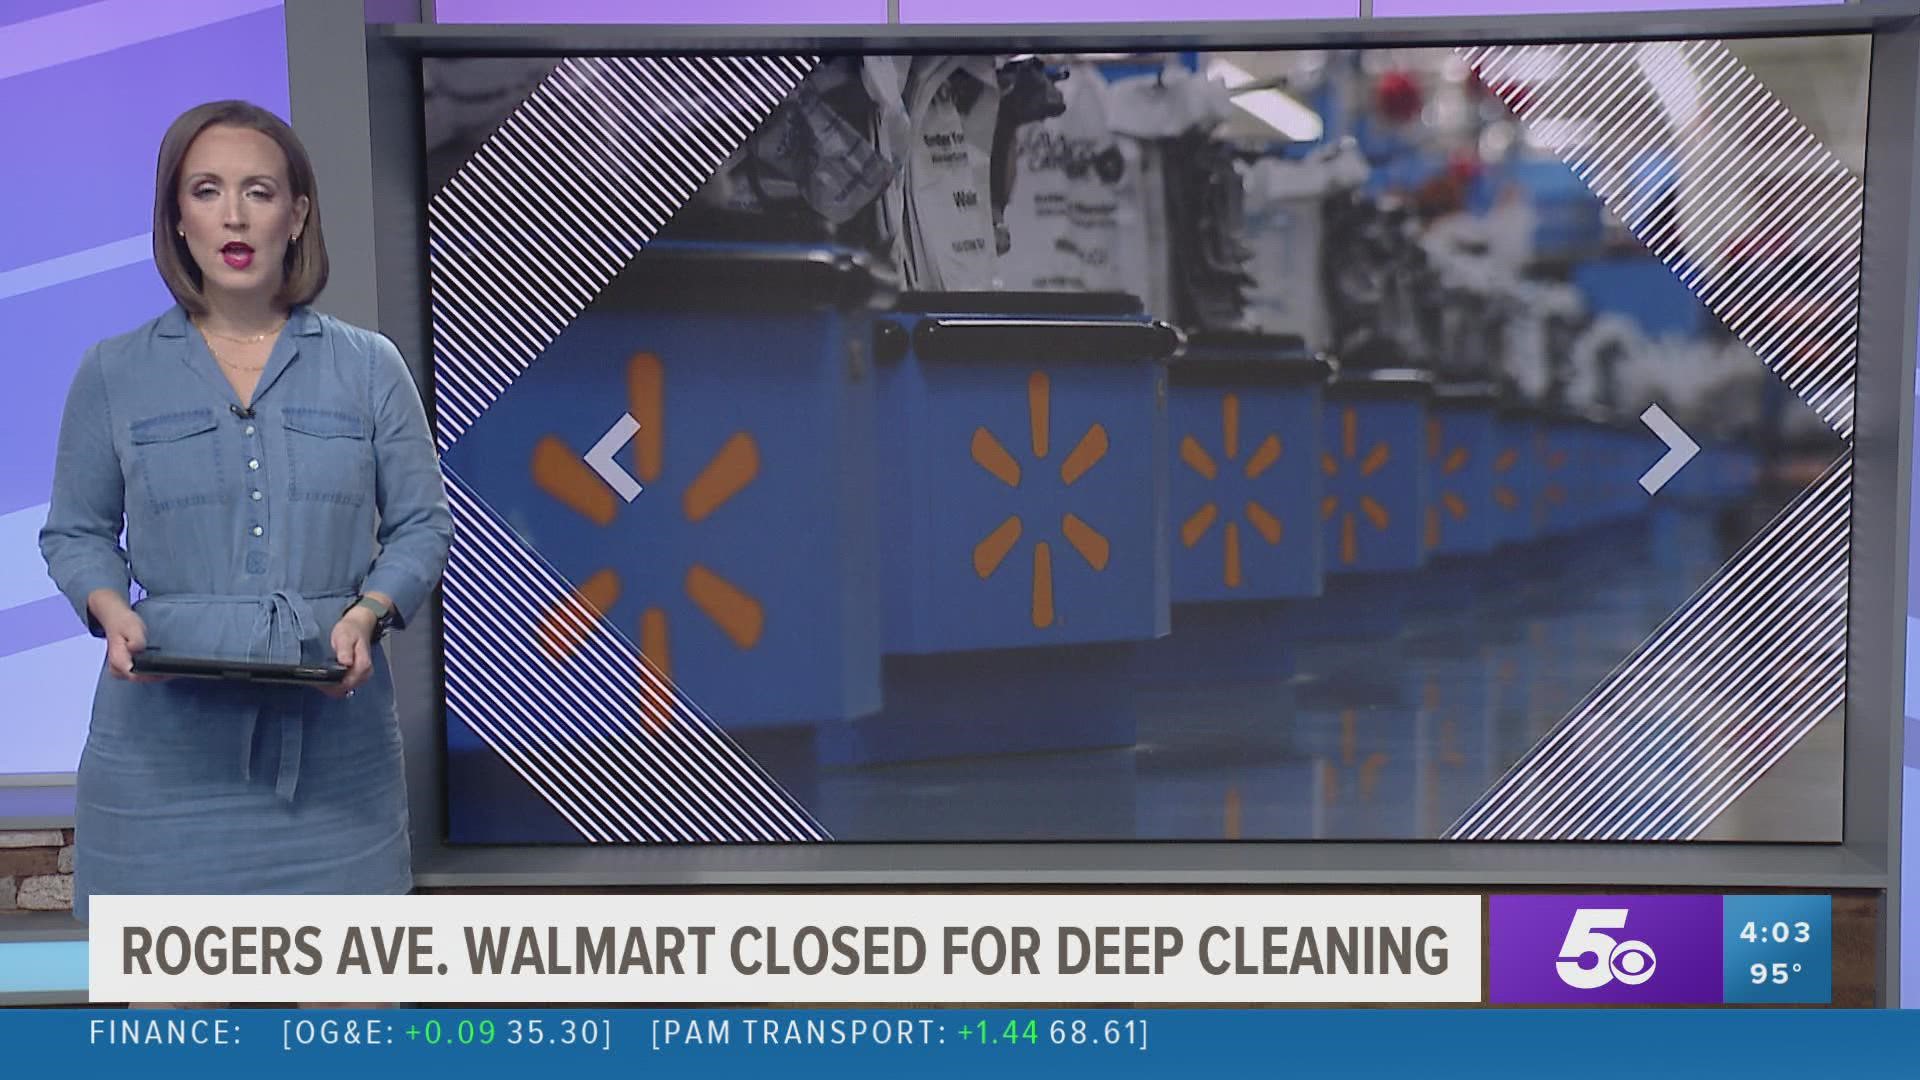 Walmart announced it will be temporarily closing one of its Fort Smith locations in order to clean and sanitize the store.